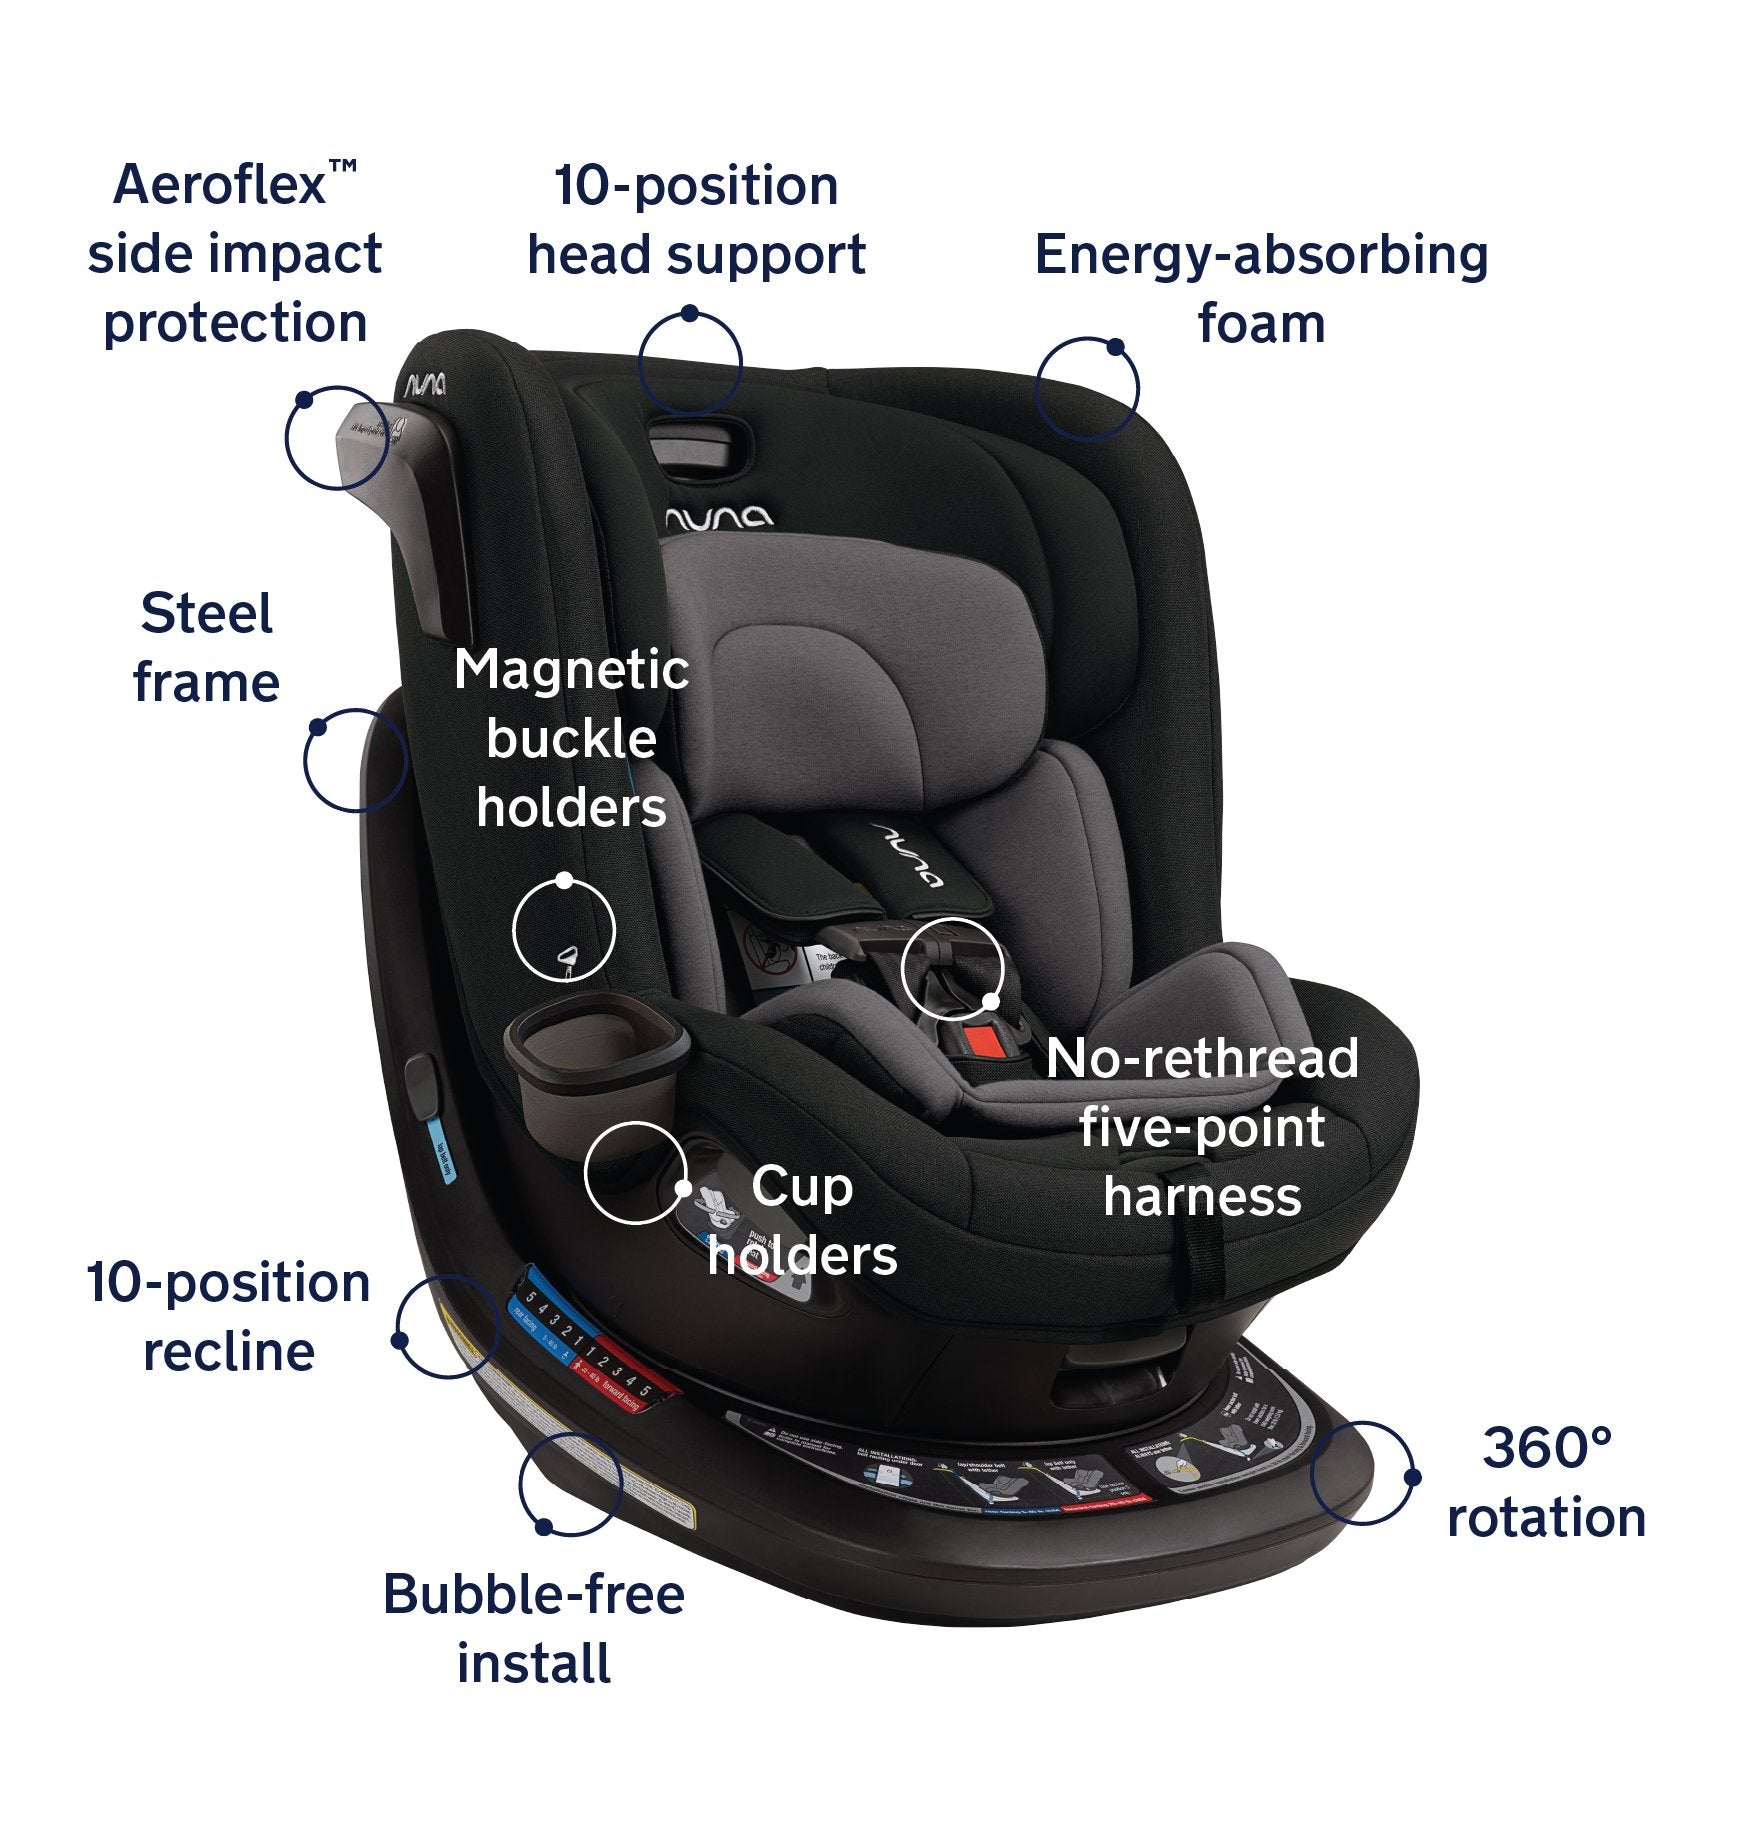 Nuna REVV Rotating Convertible Car Seat with Cupholder - ANB Baby -8720246543186$500 - $1000